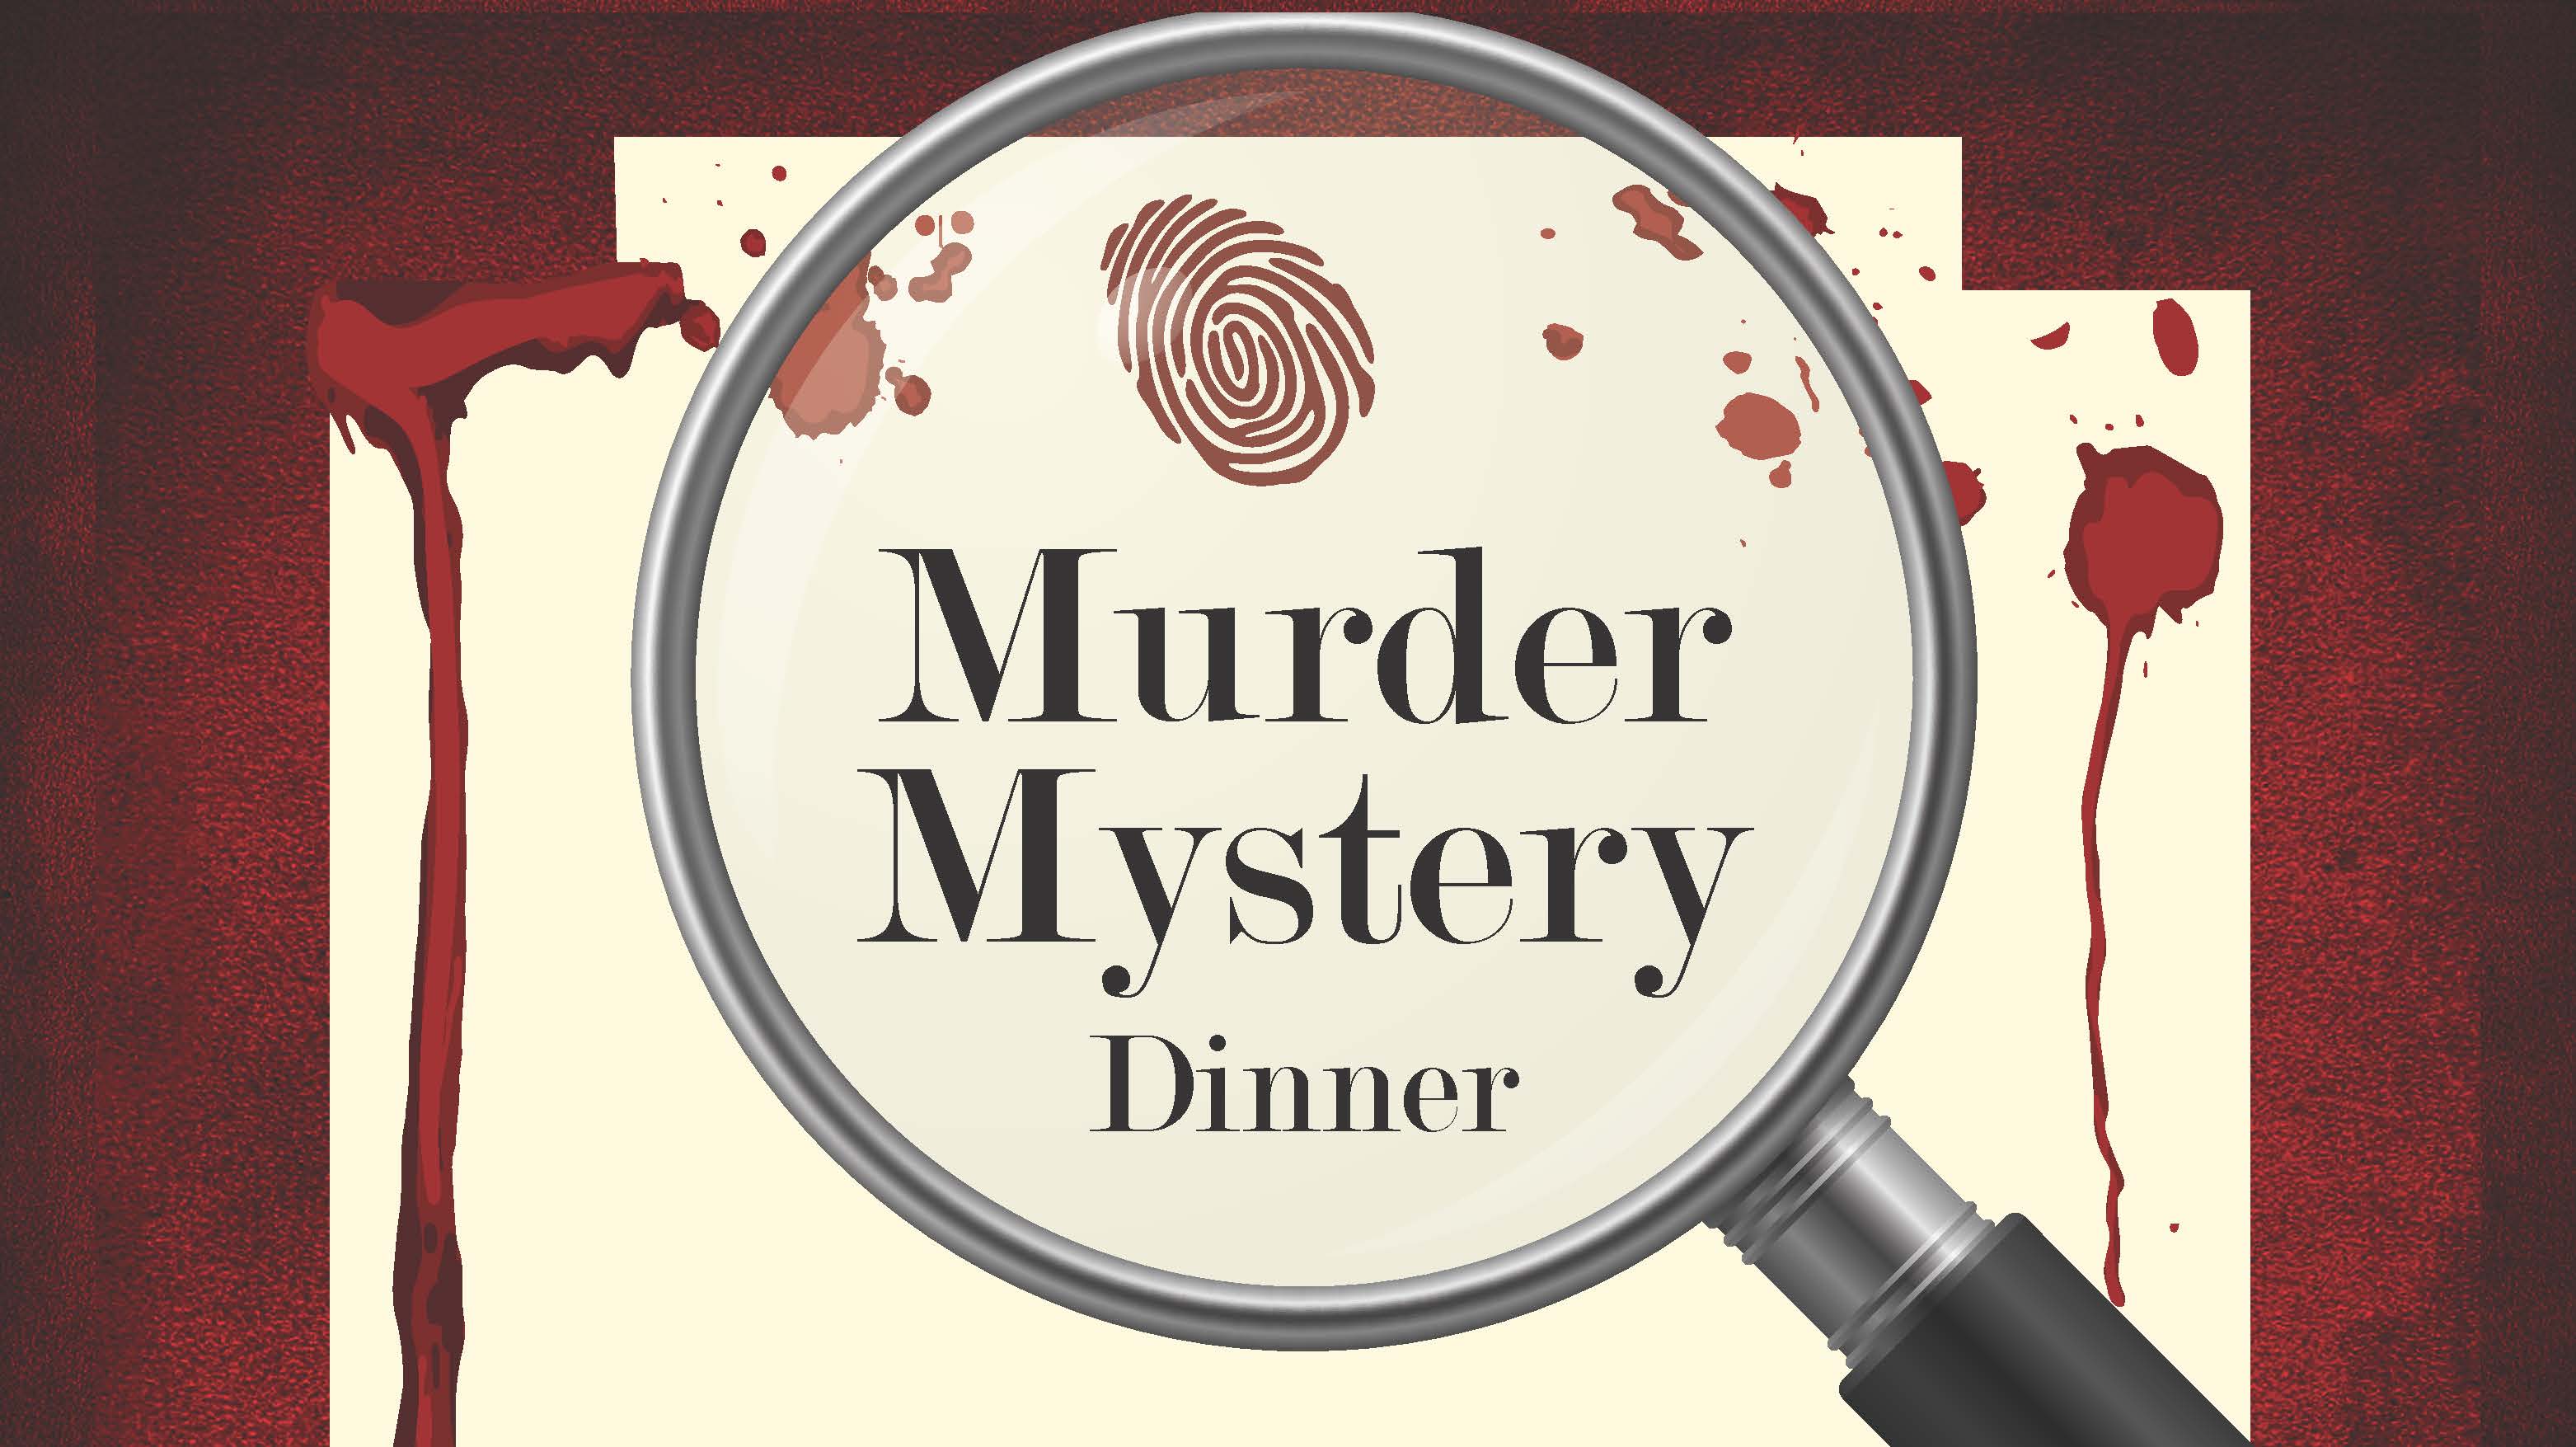 Top 15 Murder Mystery Dinner Of All Time Easy Recipes To Make at Home